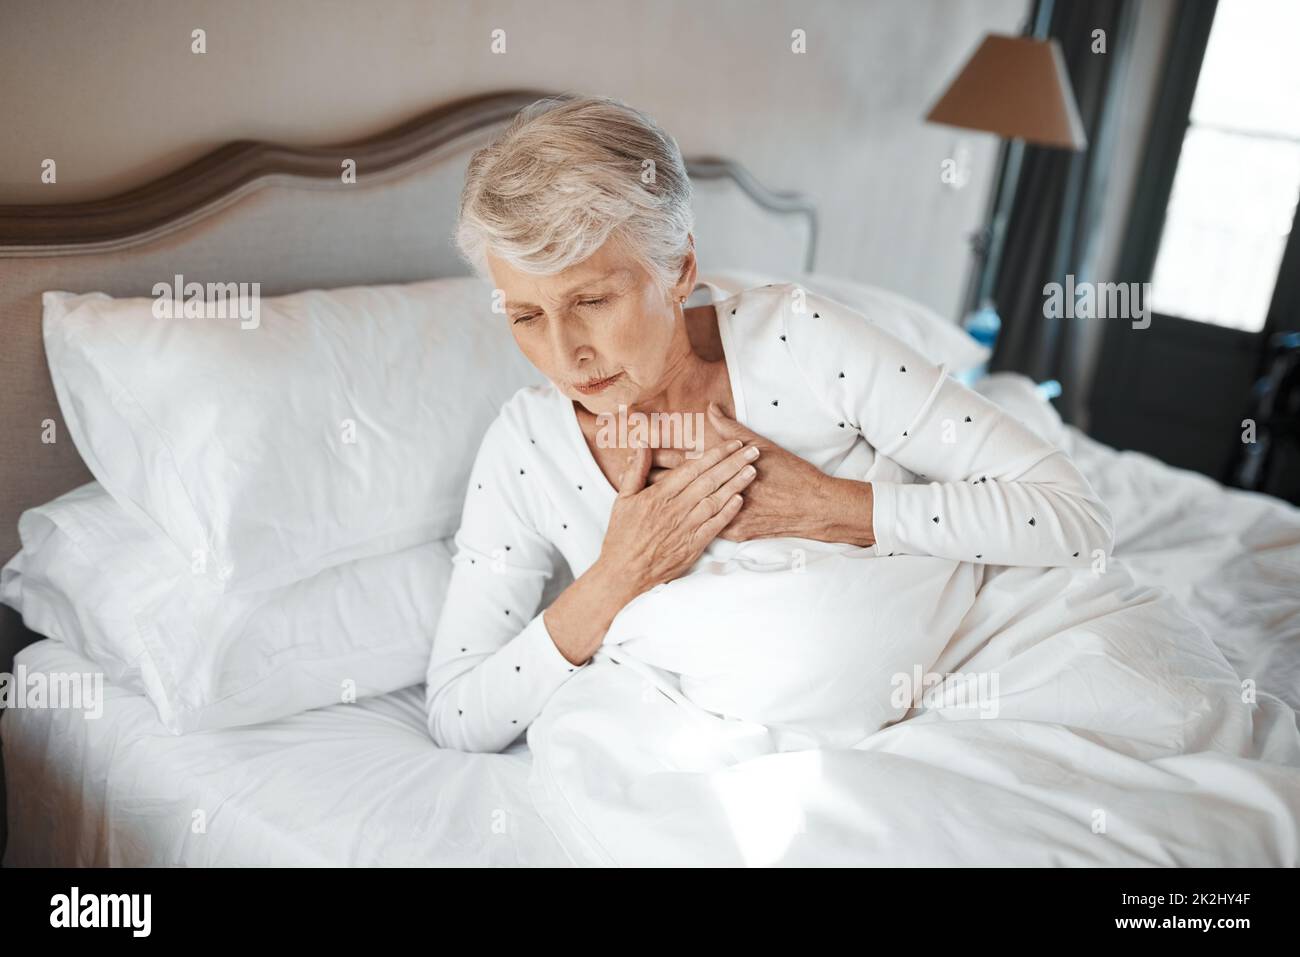 No one is immune. Shot of a senior woman experiencing chest pain in bed in a nursing home. Stock Photo